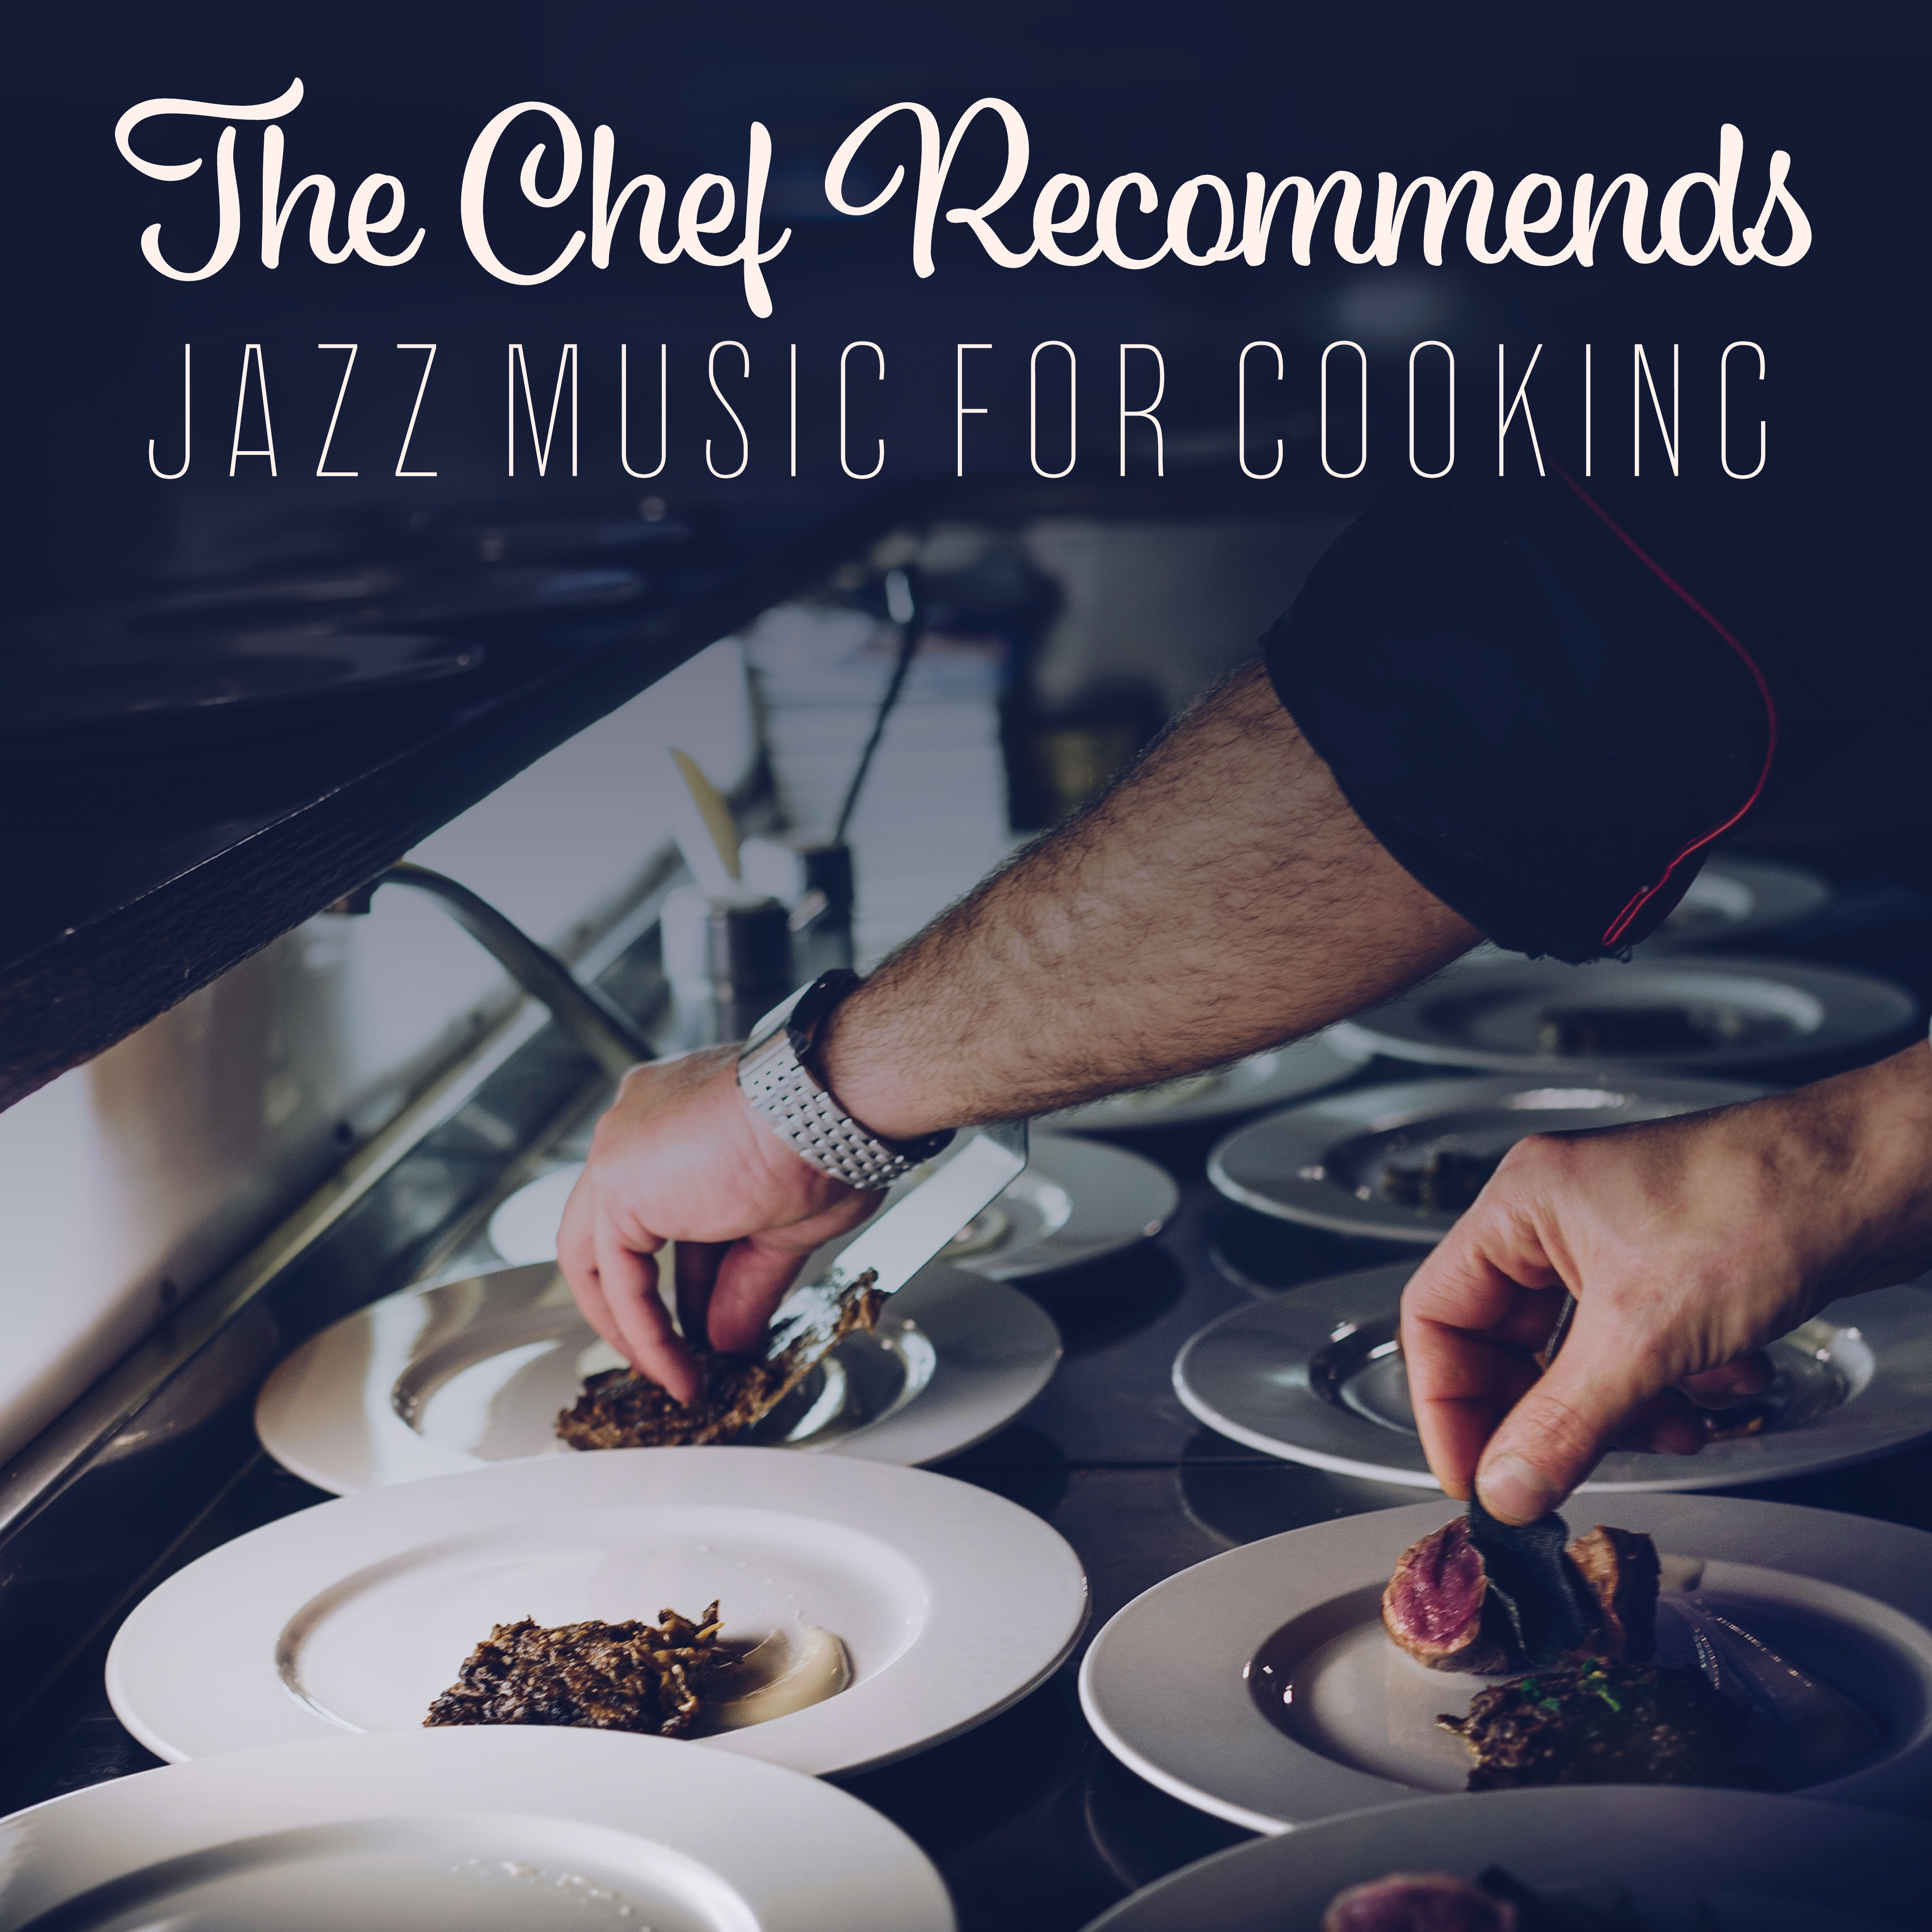 The Chef Recommends: Jazz Music for Cooking